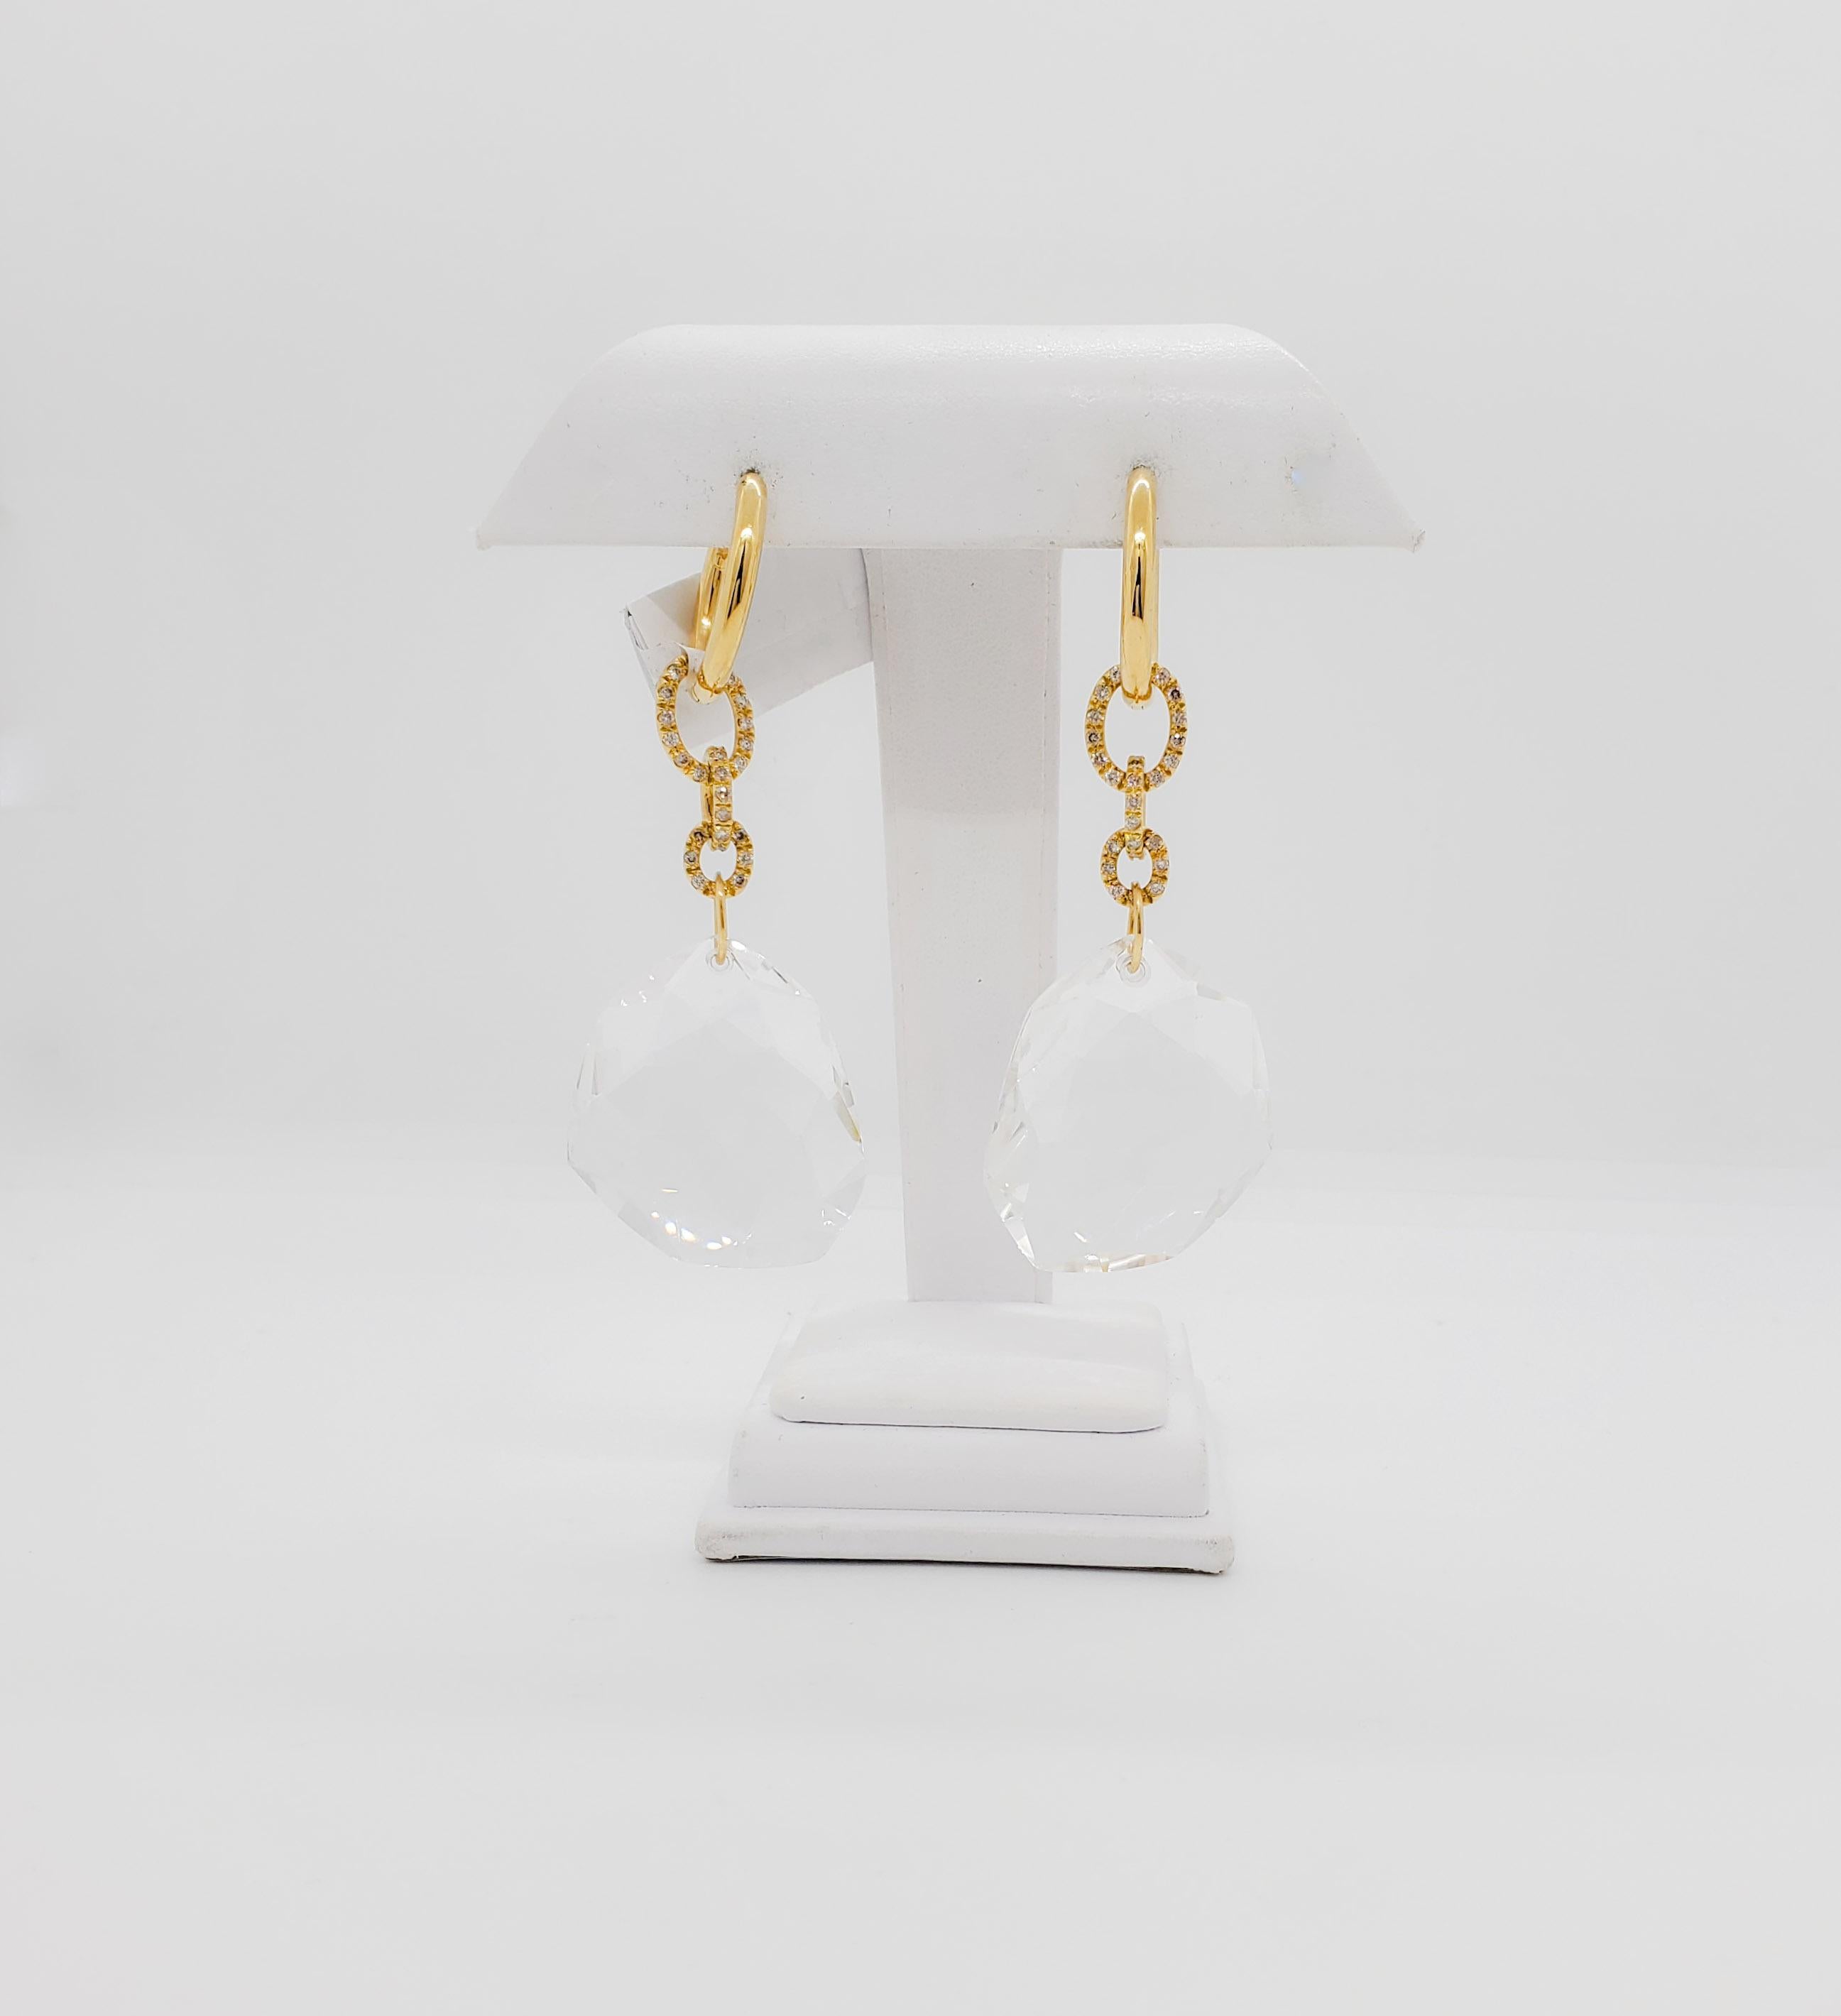 Uncut H. Stern and DVF Collaboration Dangle Earrings with Diamonds in 18k Yellow Gold